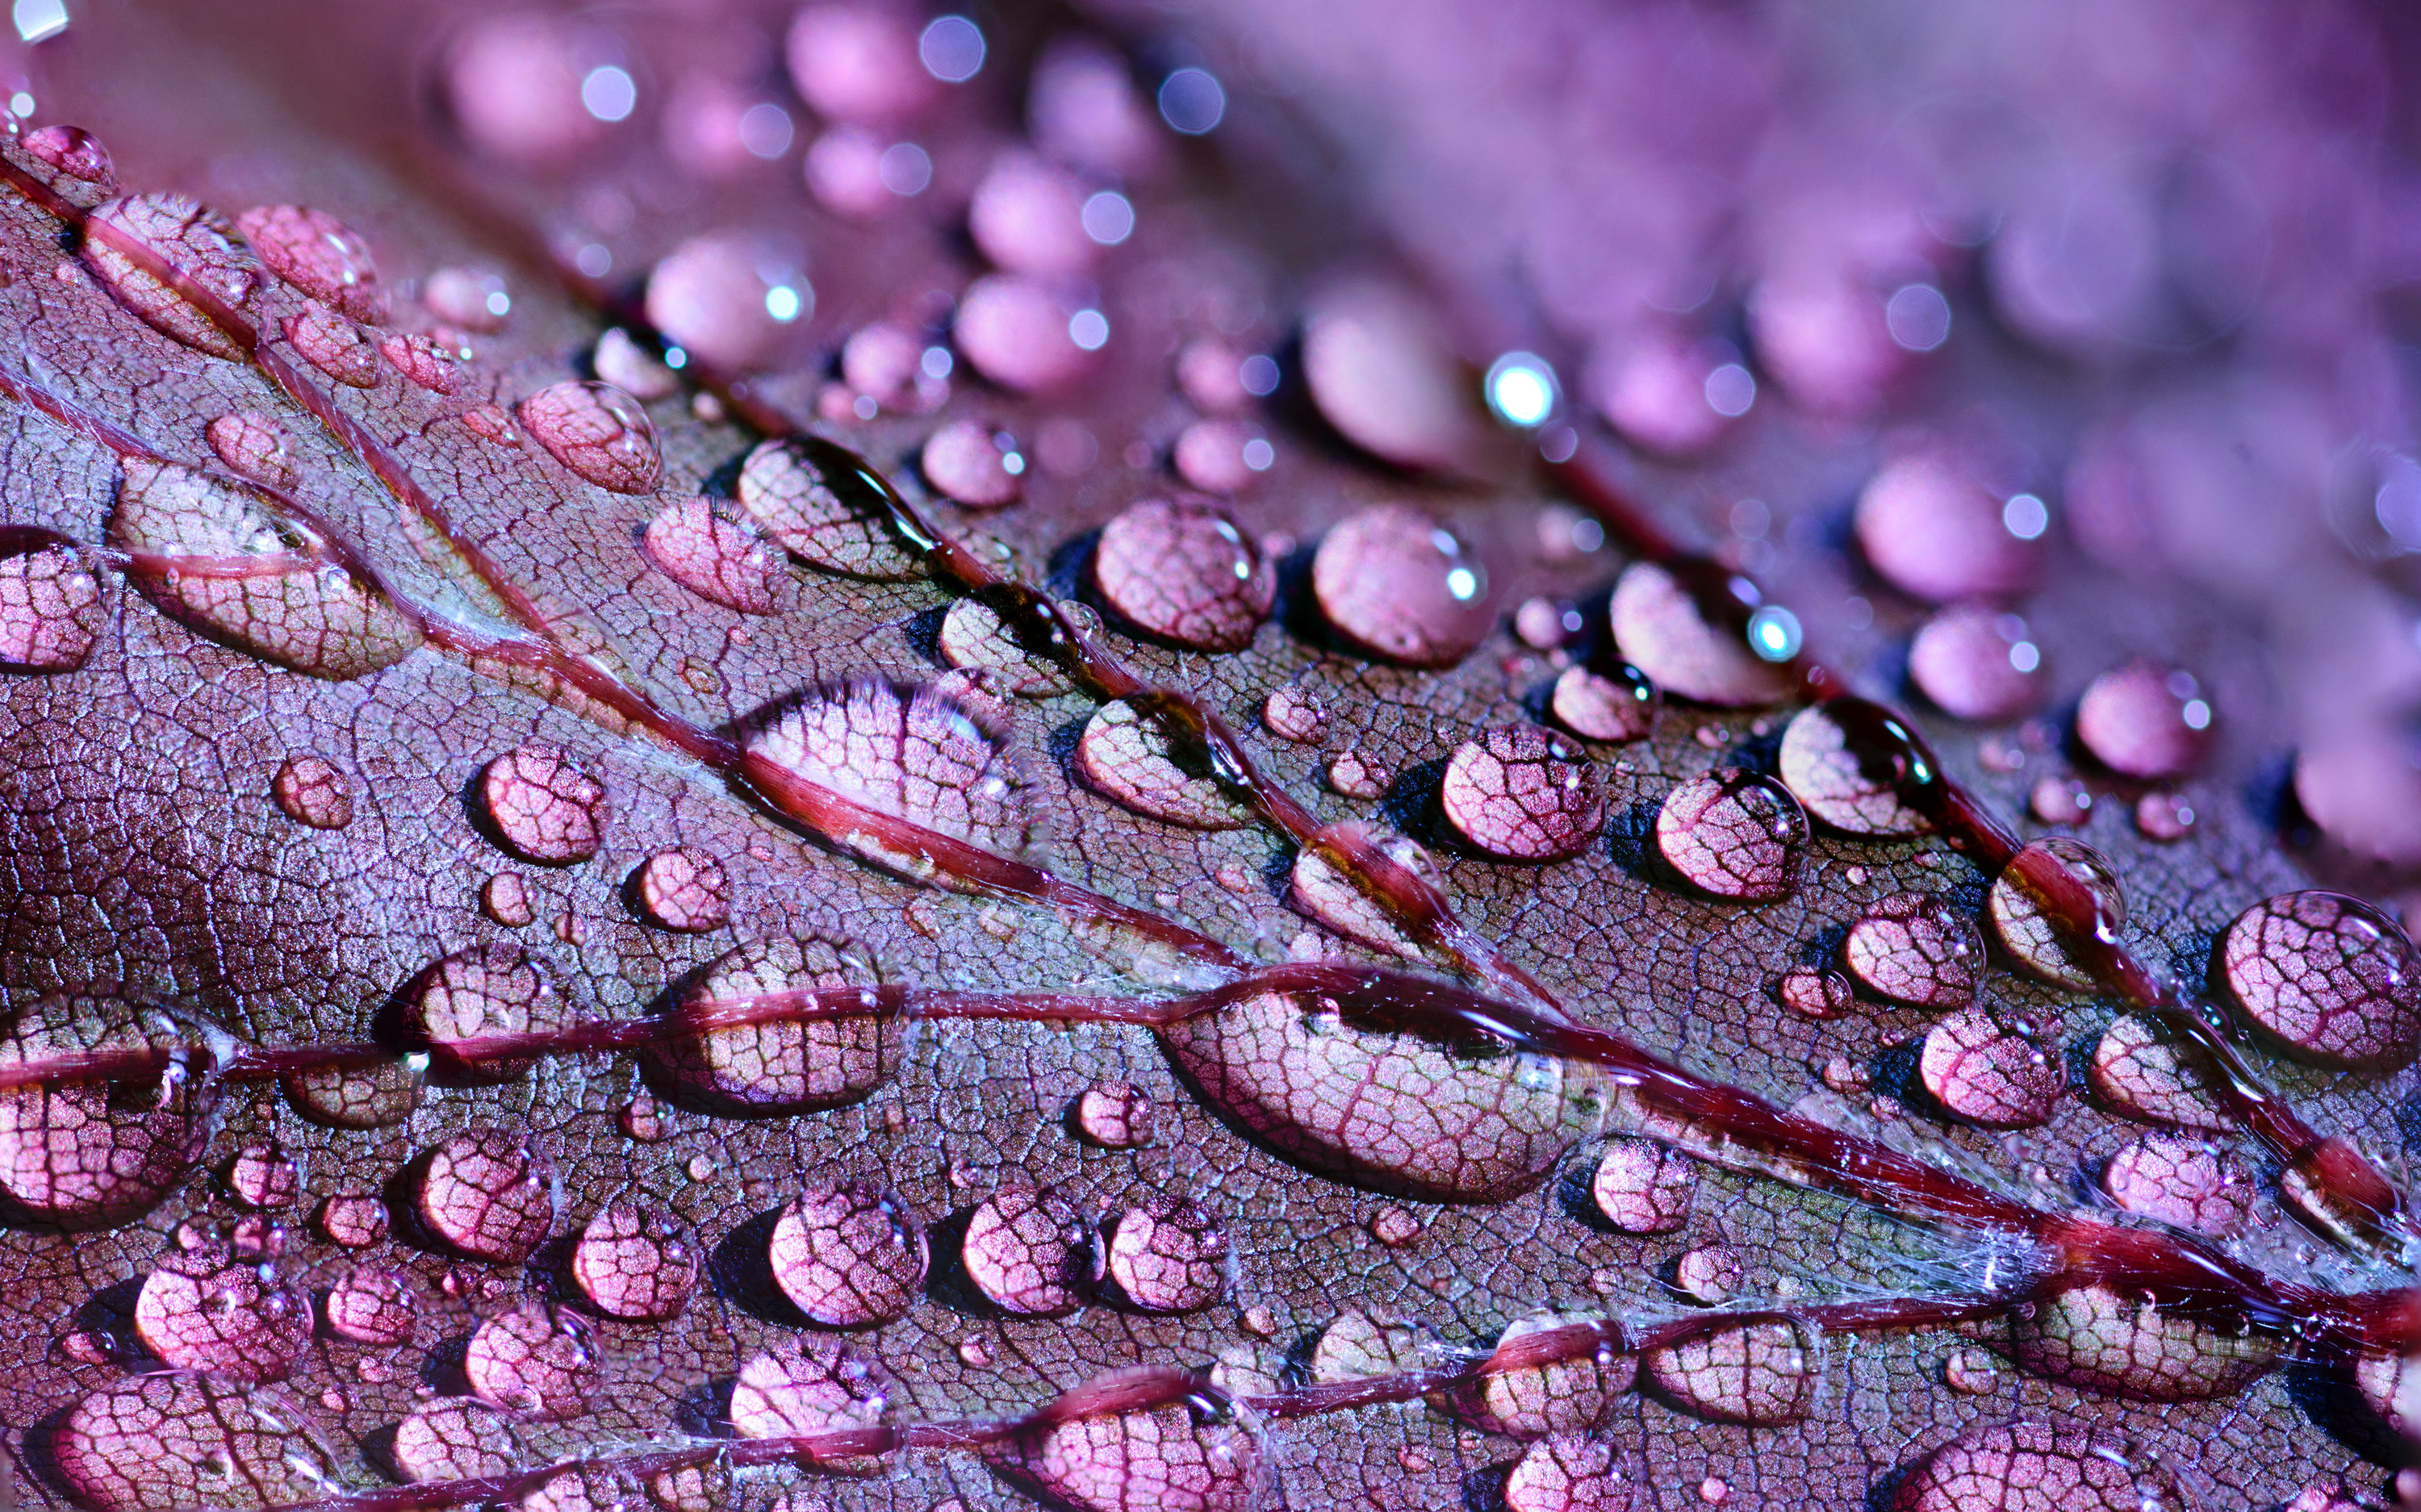 zoomed in image of water droplets on a purple leaf, wherein you can see the veins of the leaf